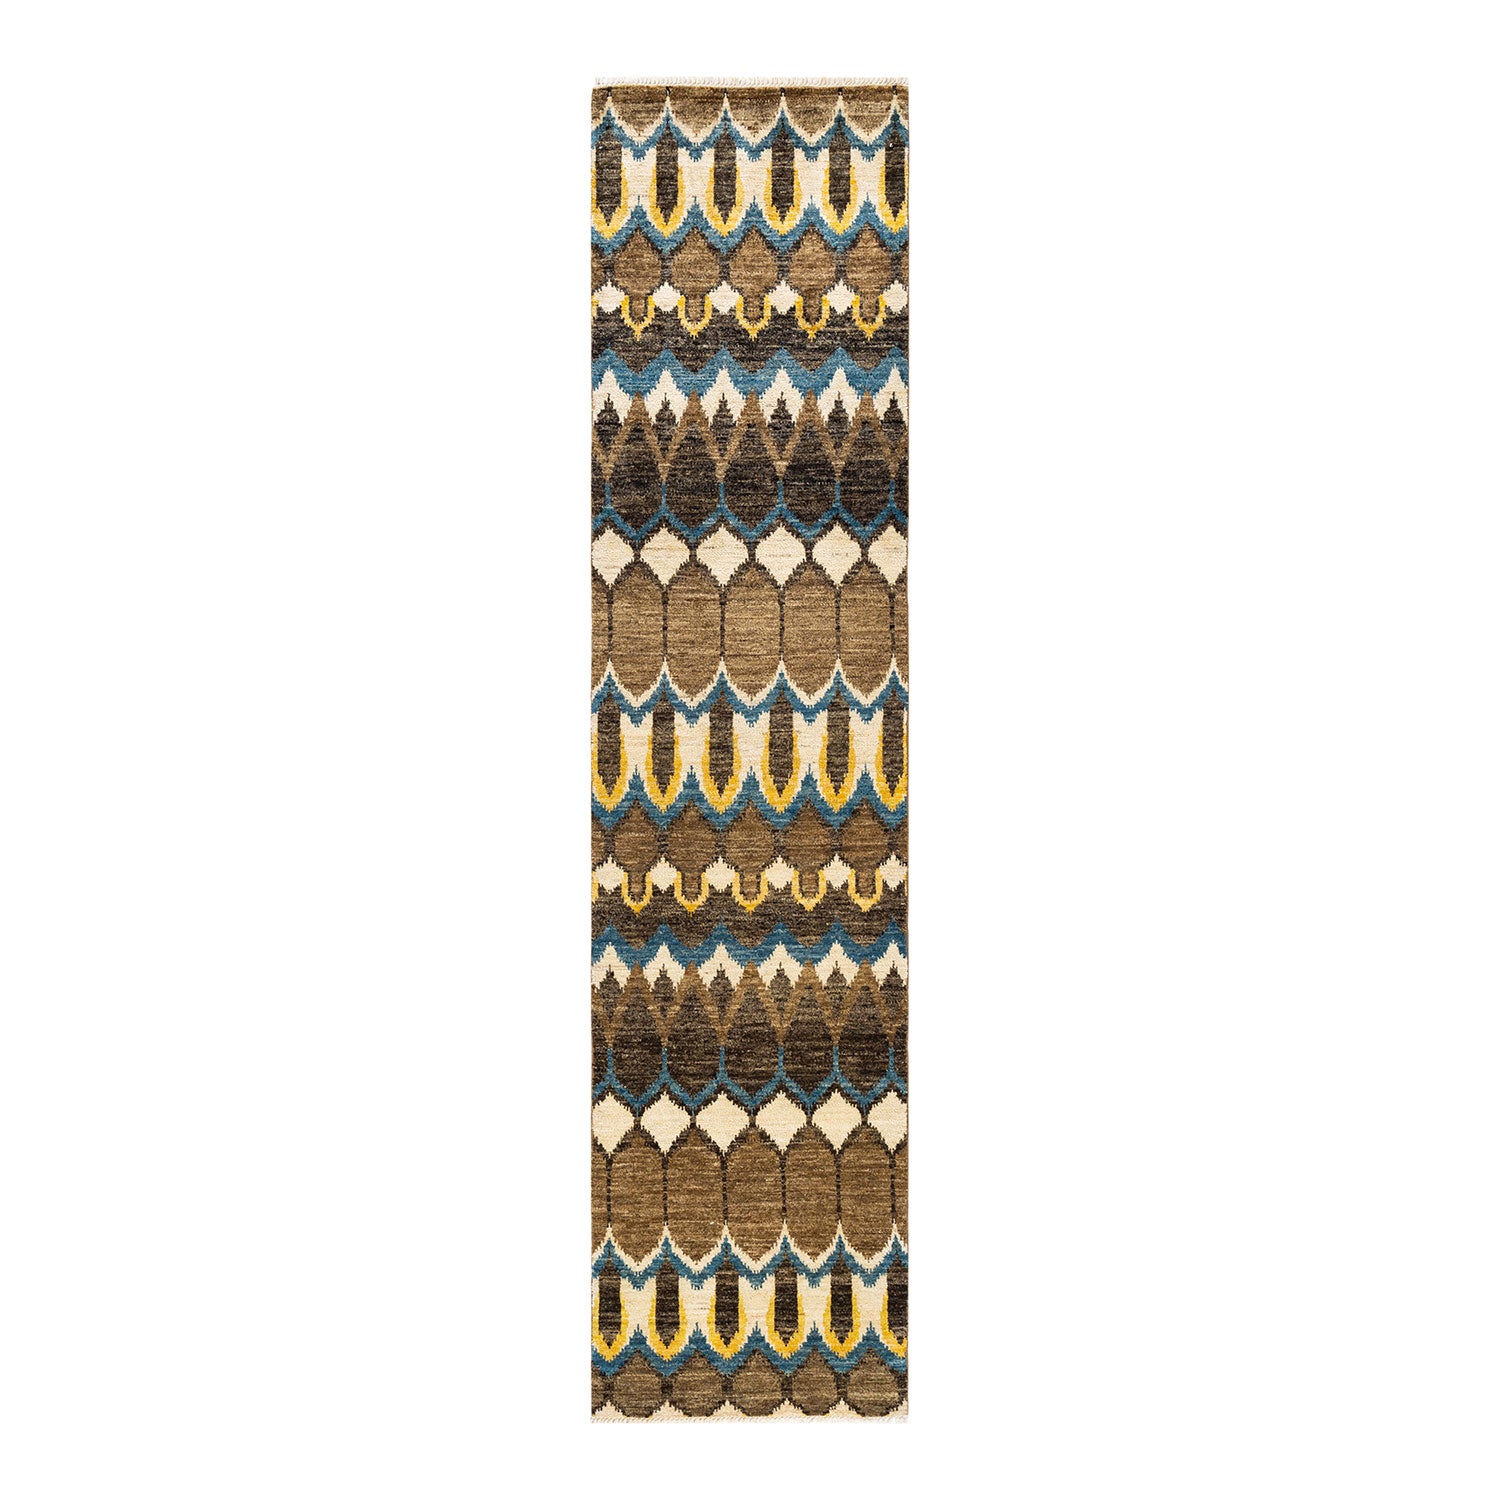 Symmetrical tribal runner with stylized leaf pattern in earth tones.